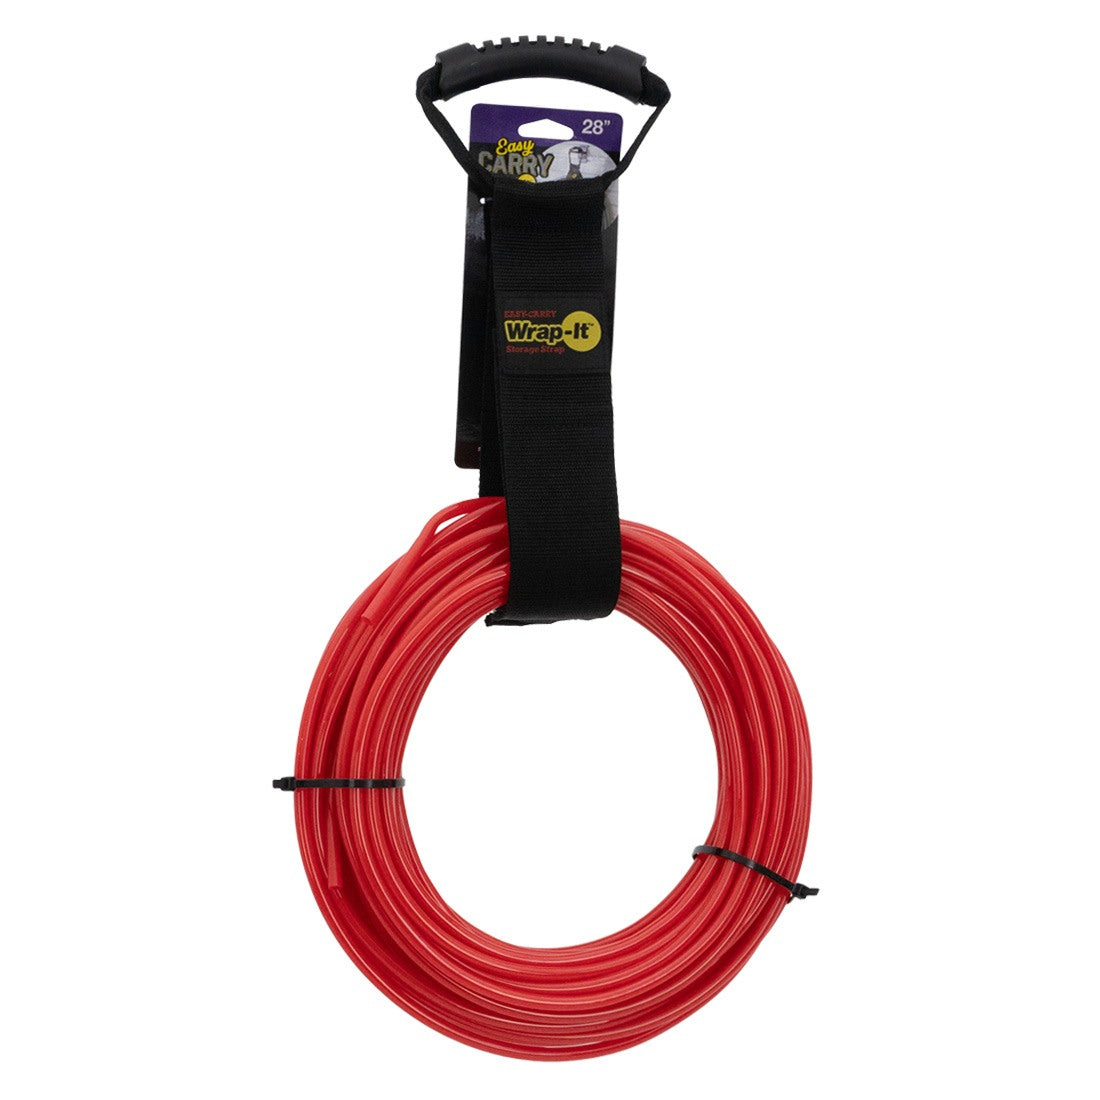 Wrap-It Easy-Carry Storage Strap - 28 Inch Suspending Red Hose Front View